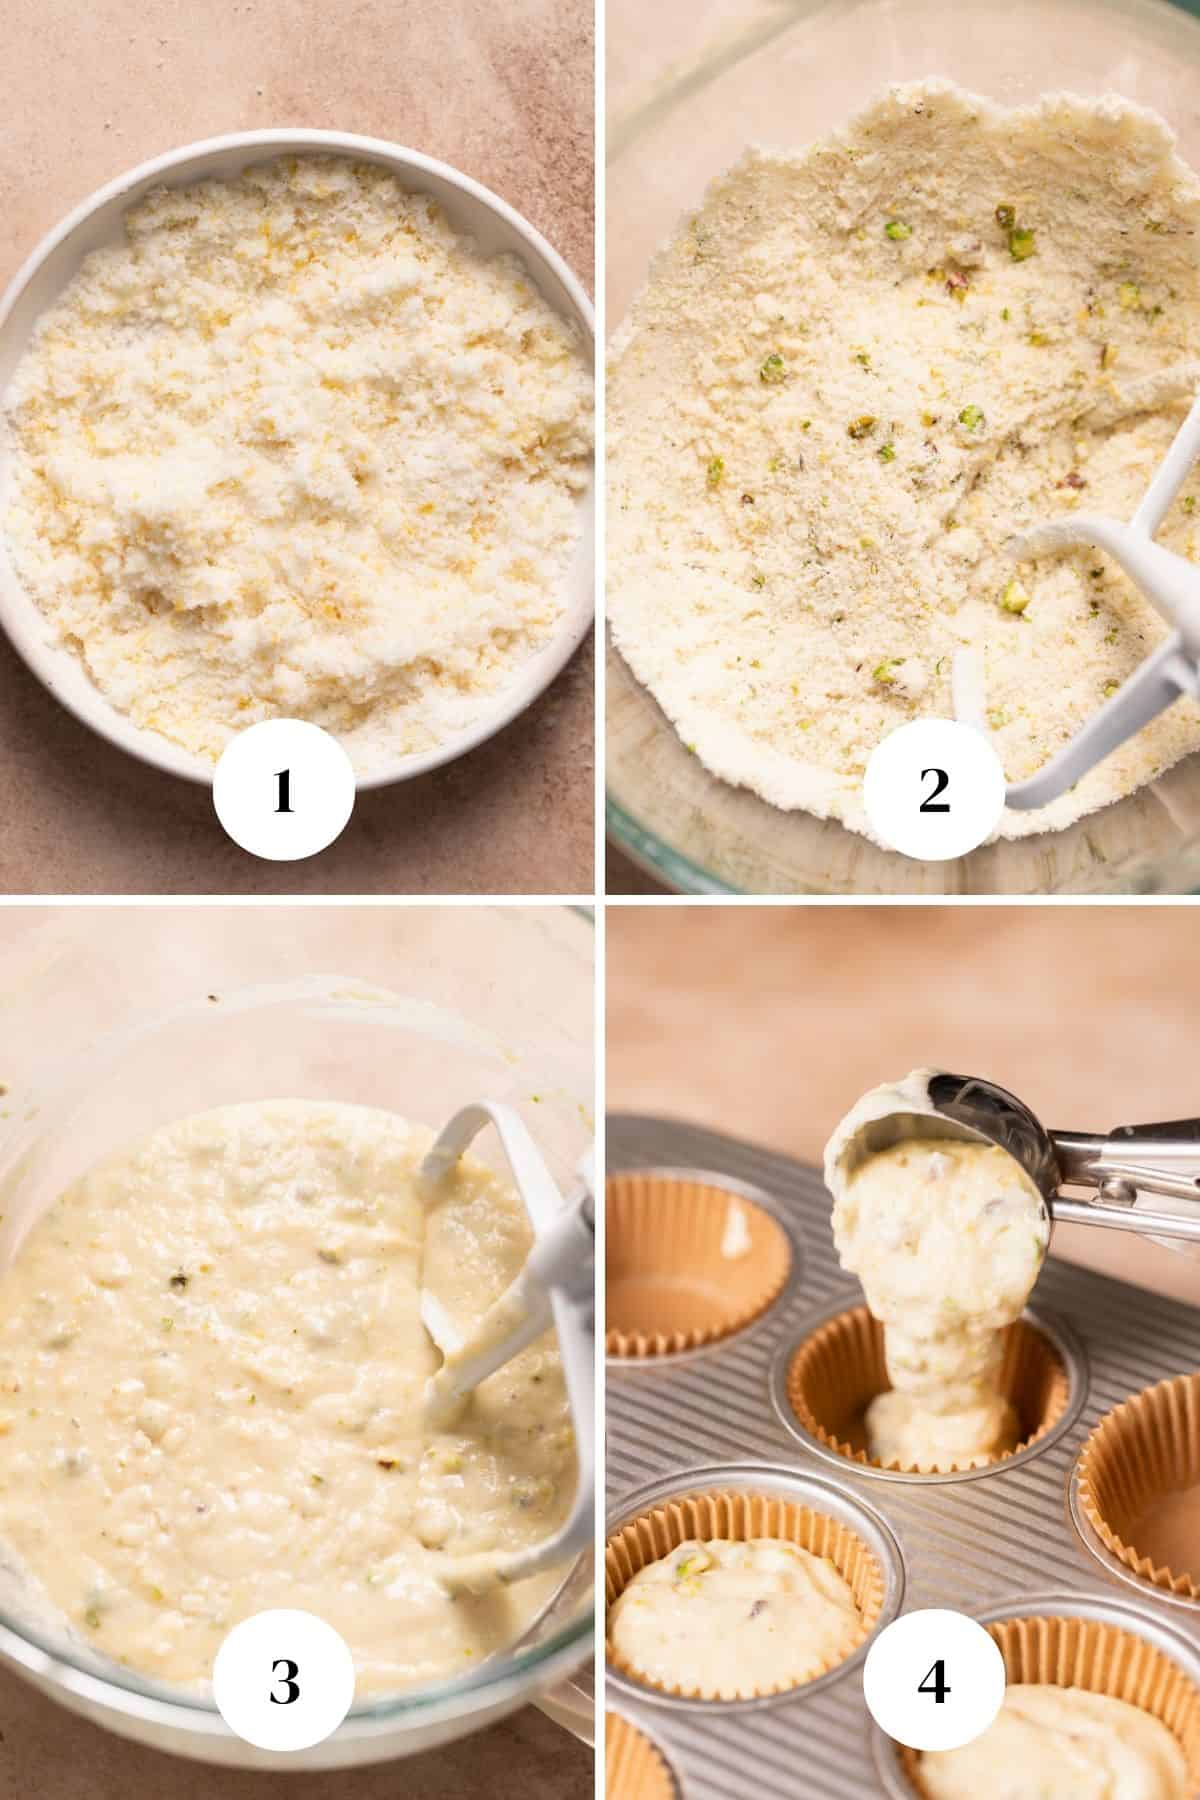 A process collage of the steps for making the lemon cupcake batter.